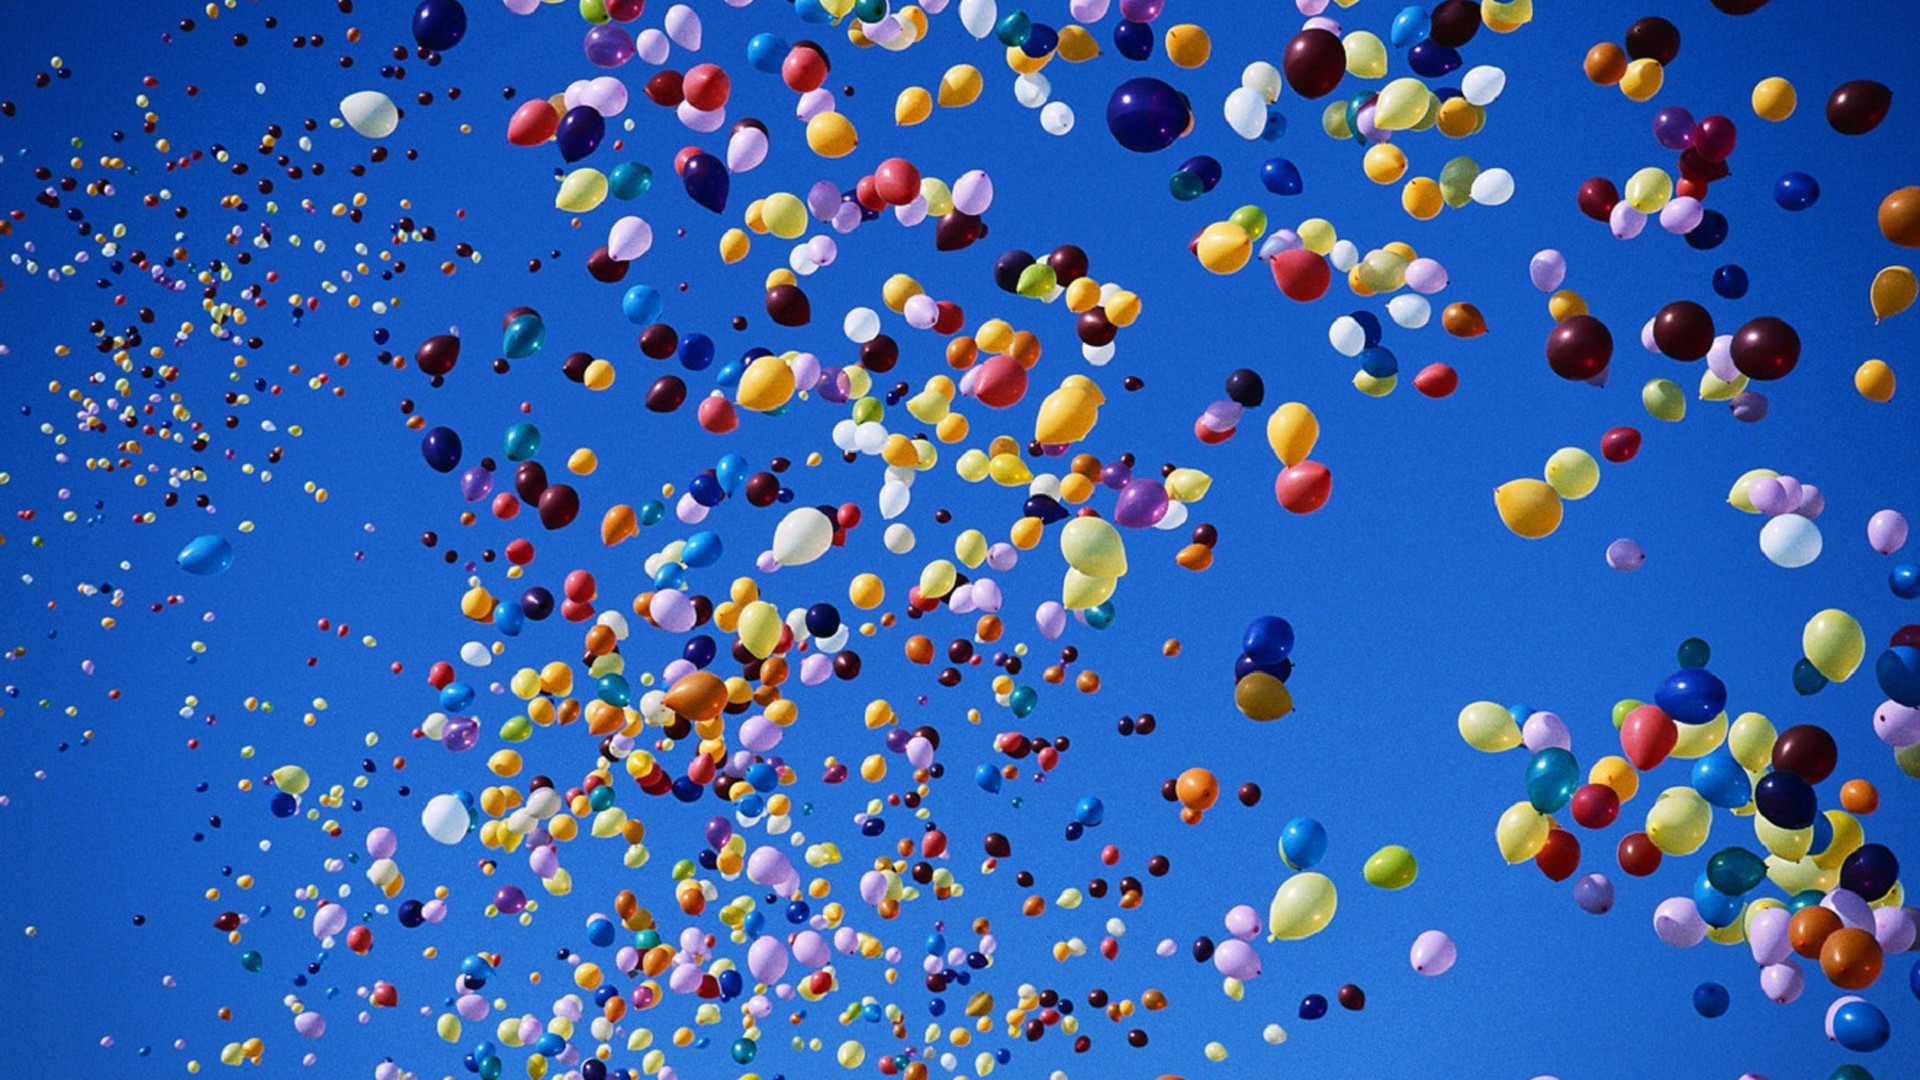 1920x1080 Colorful Balloons Desktop Wallpaper and Images | Cool Wallpapers